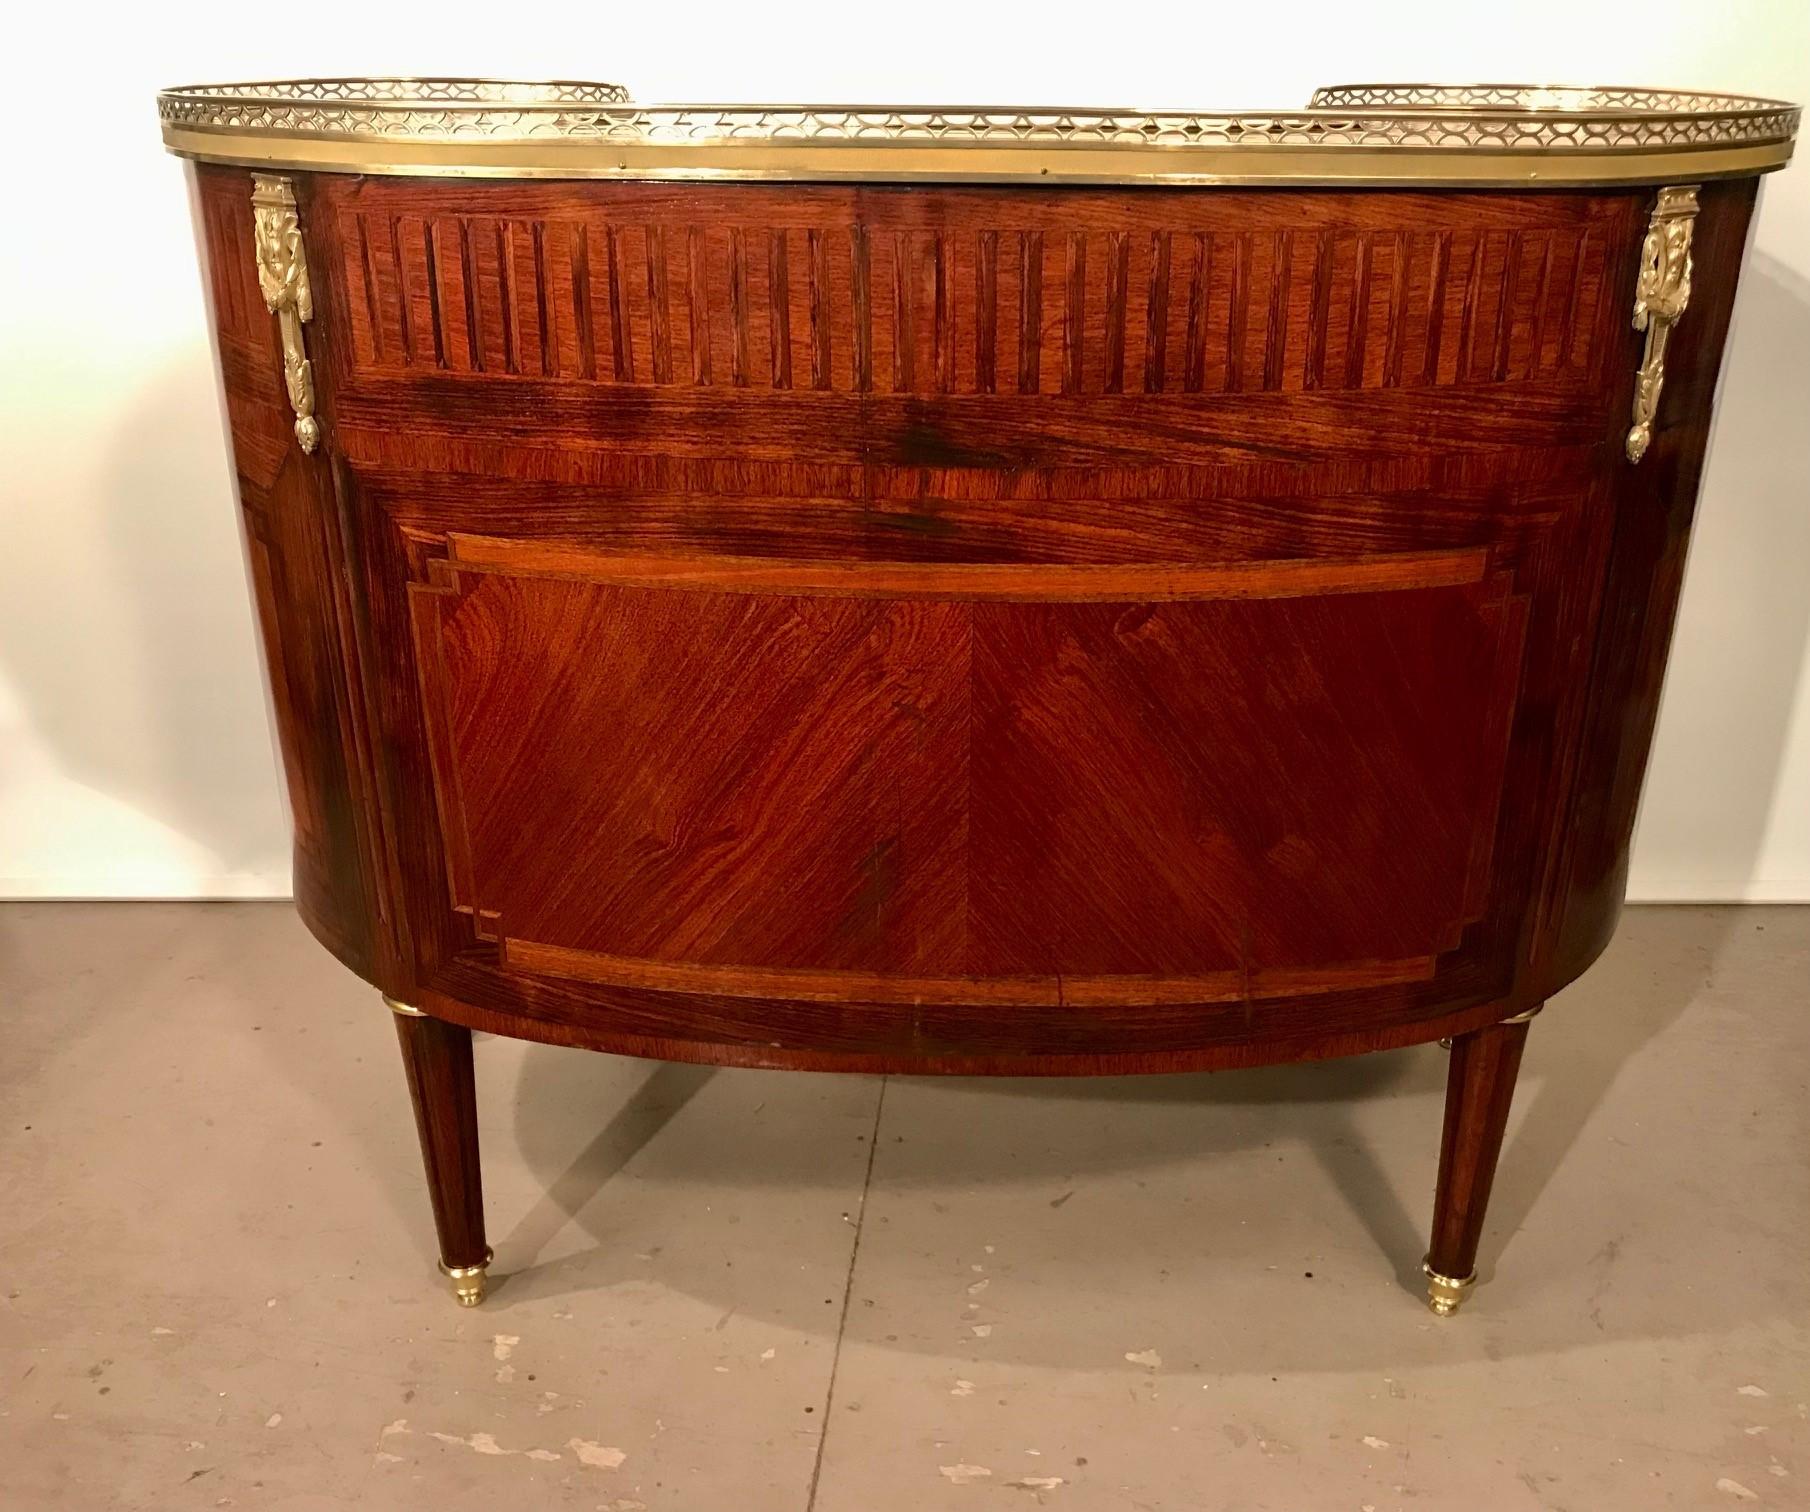 Antique French Louis XVI Style Mahogany and Parquetry Bureau a Rognon For Sale 5